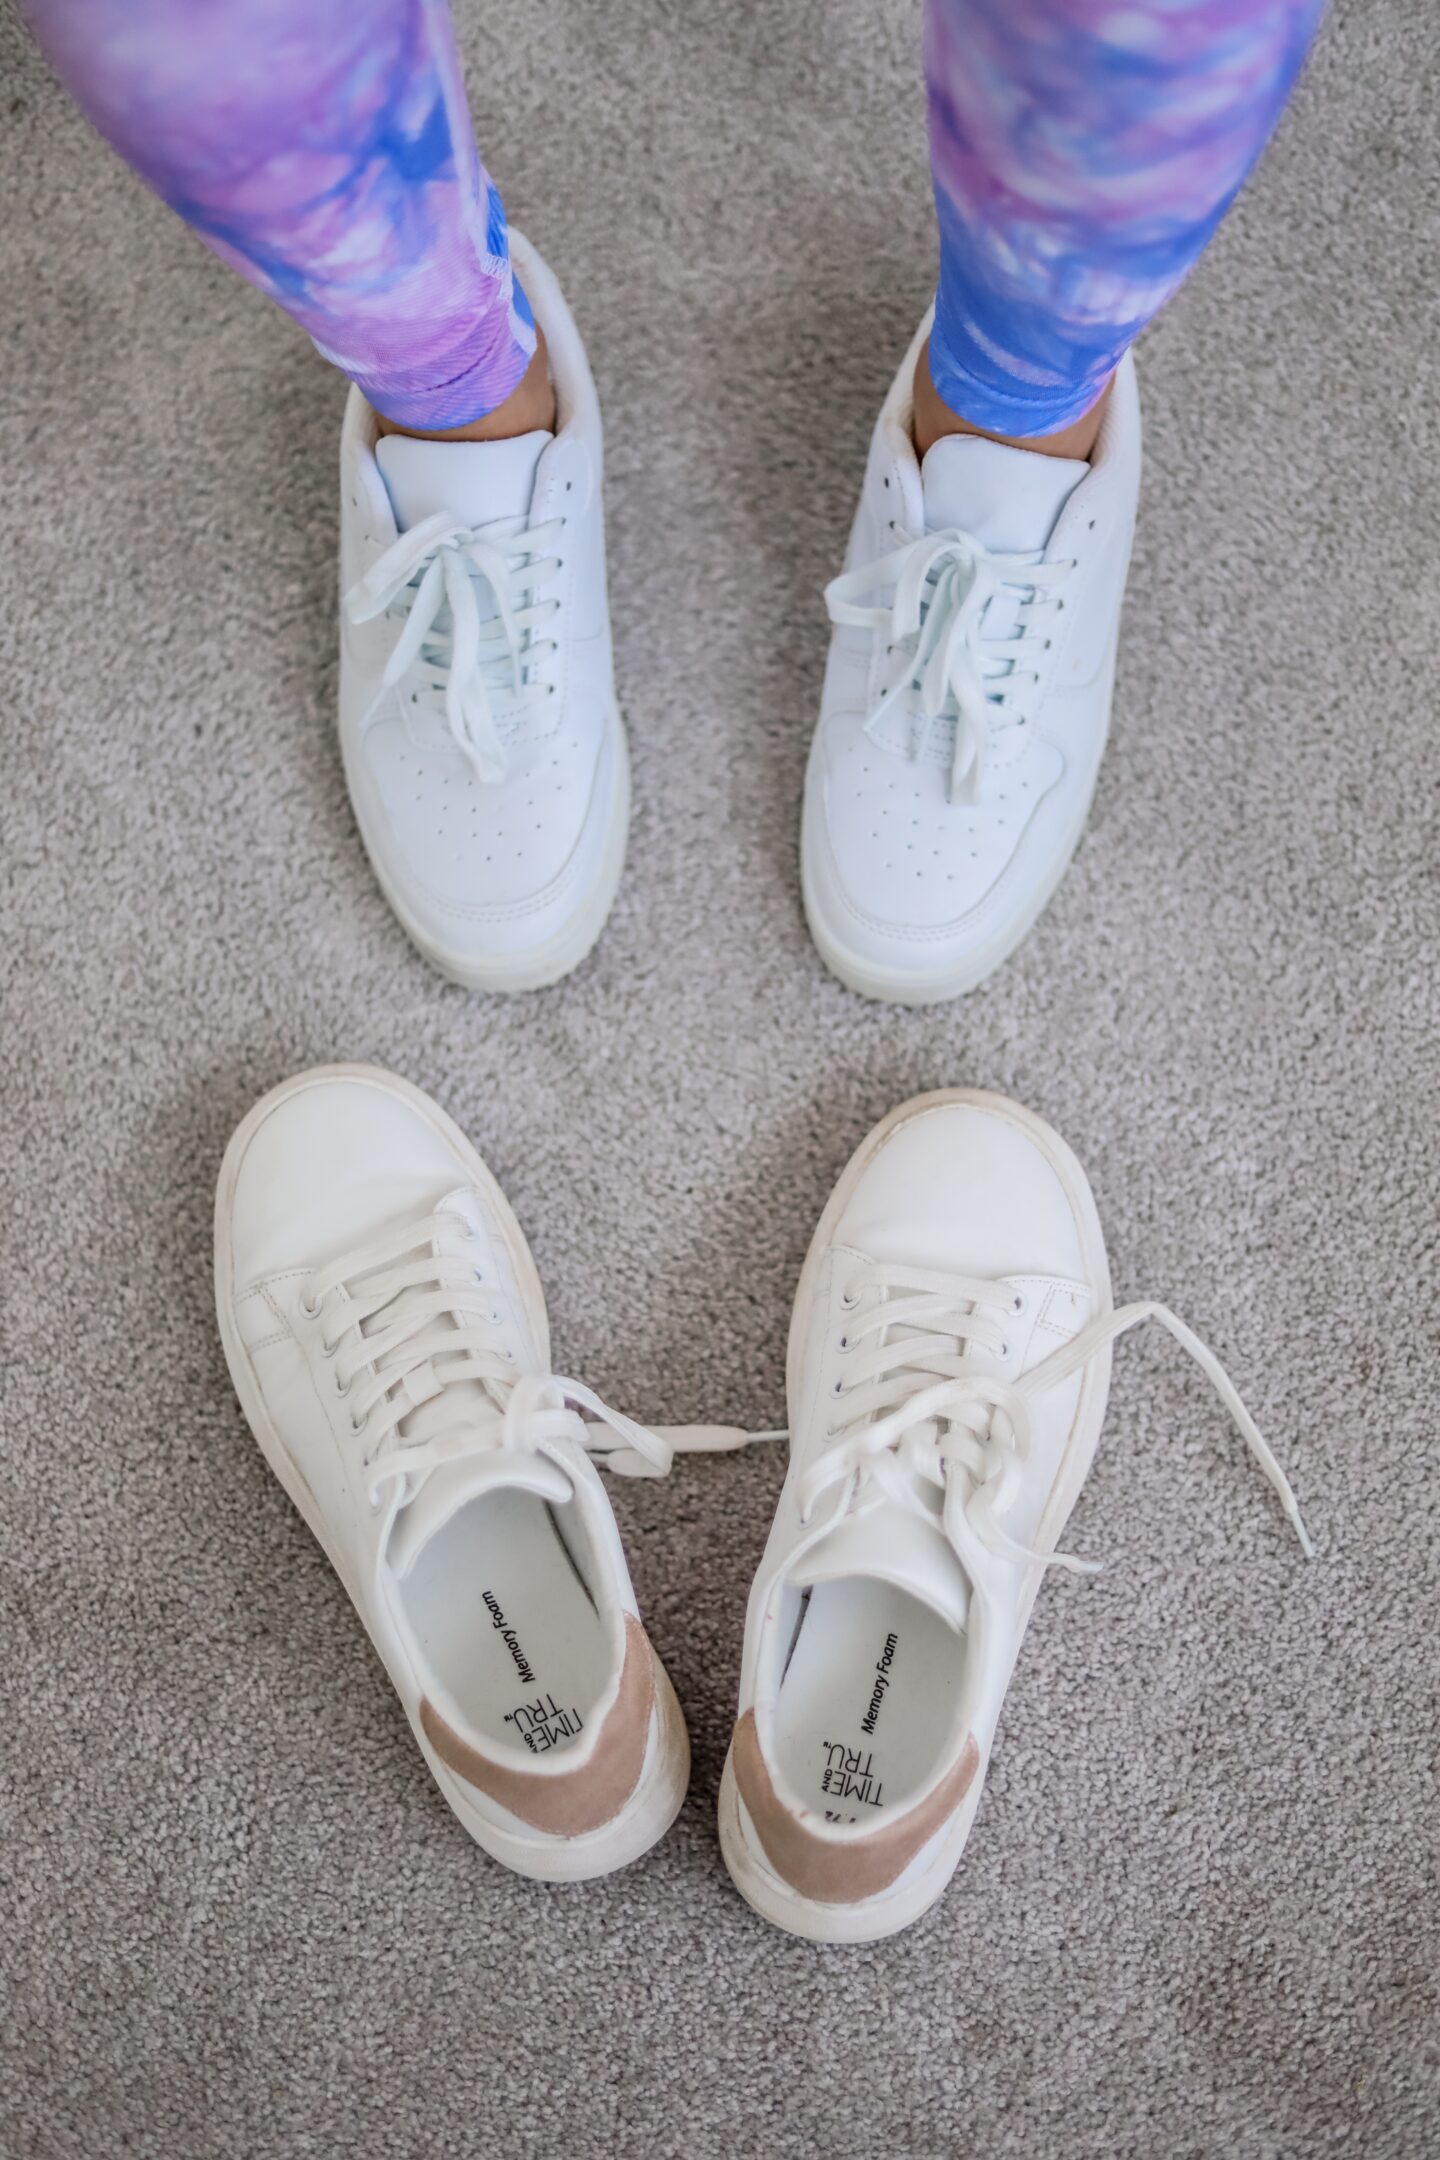 COOL SH*T I LOVELOVELOVE - Monthly Favorites, June 2022 on Coming Up Roses - WALMART SNEAKERS